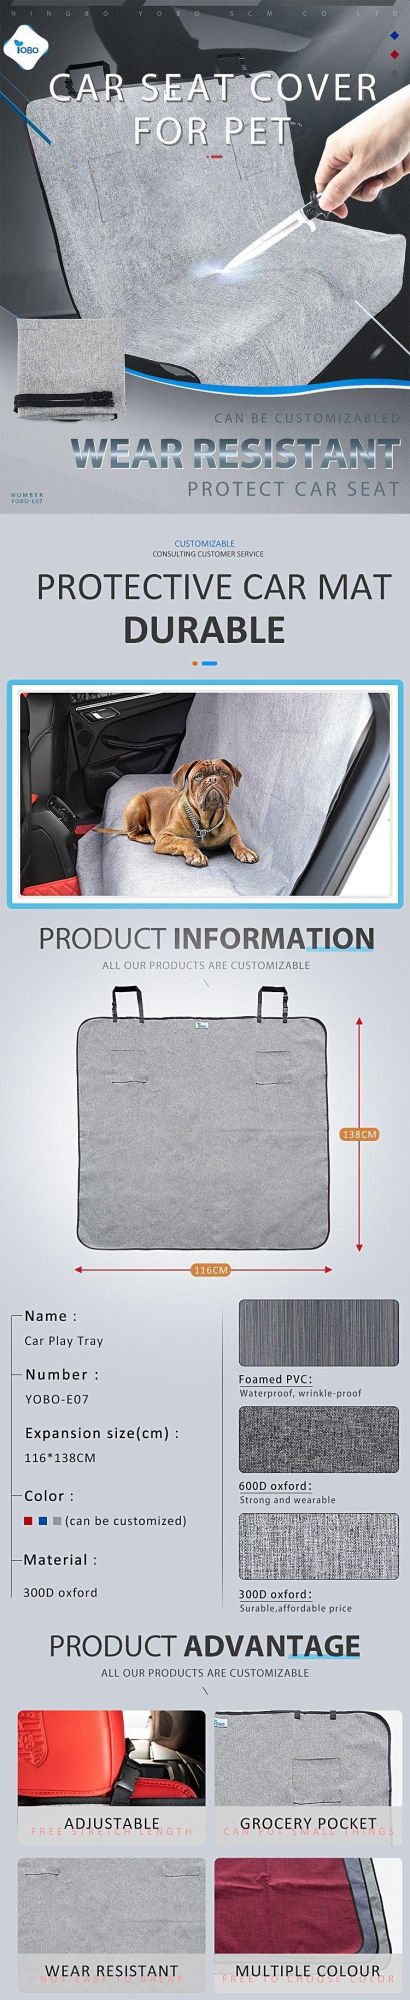 New Modern 600d Oxford Dog Car Seat Cover Anti-Waterproof Mats Car Seat Protector Car Back Seat Organizer with Mesh Window